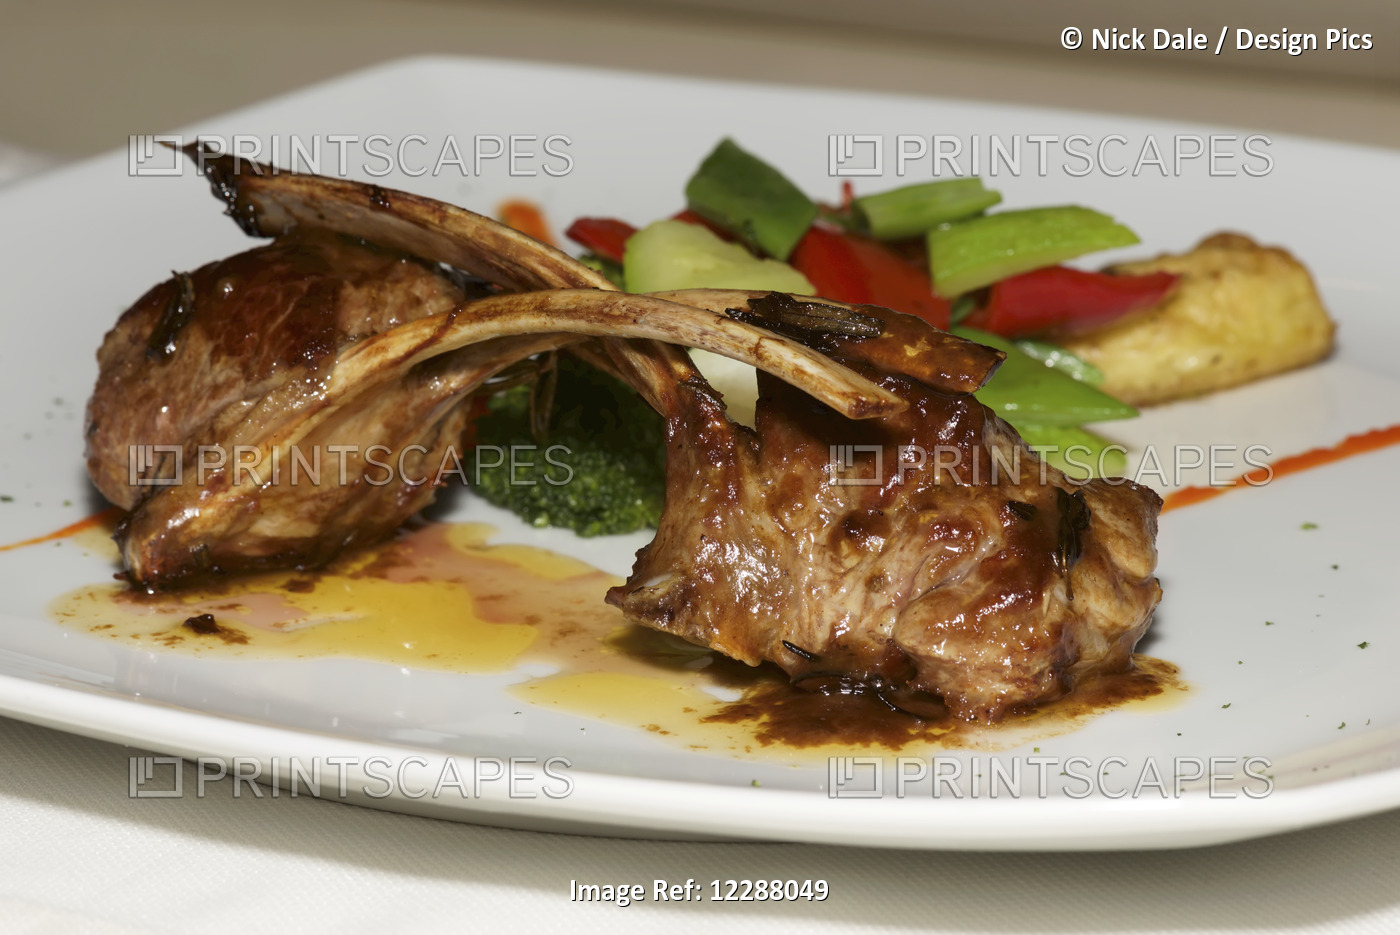 Lamb Cutlets With Vegetables On White Plate; Ankara, Turkey